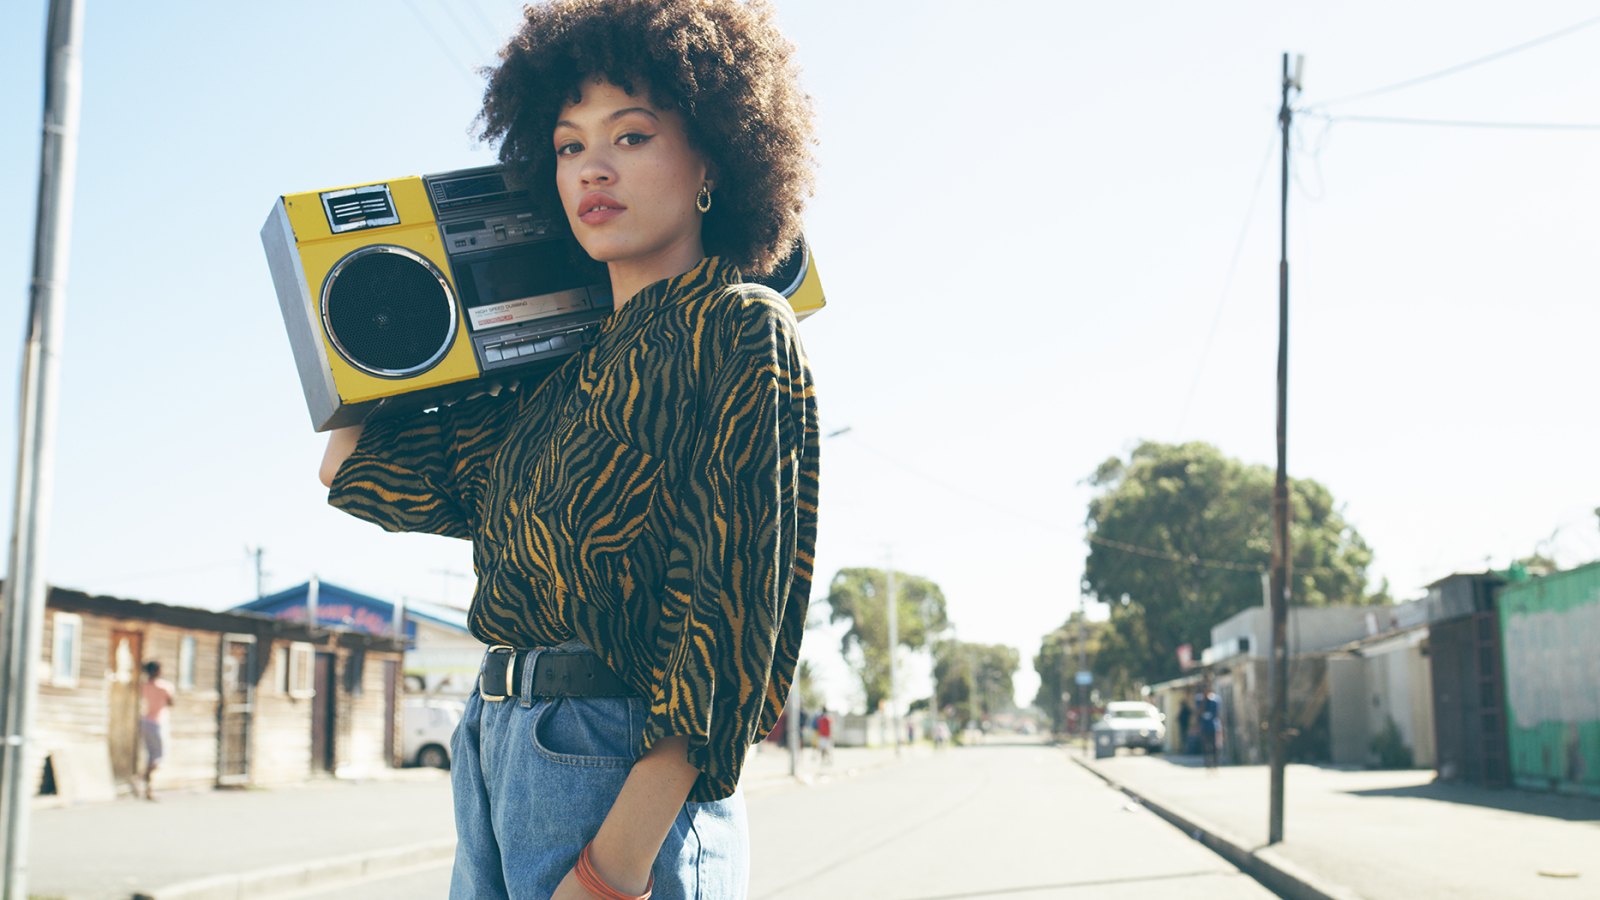 Shot of an attractive young woman listening to music on a boombox in an urban setting